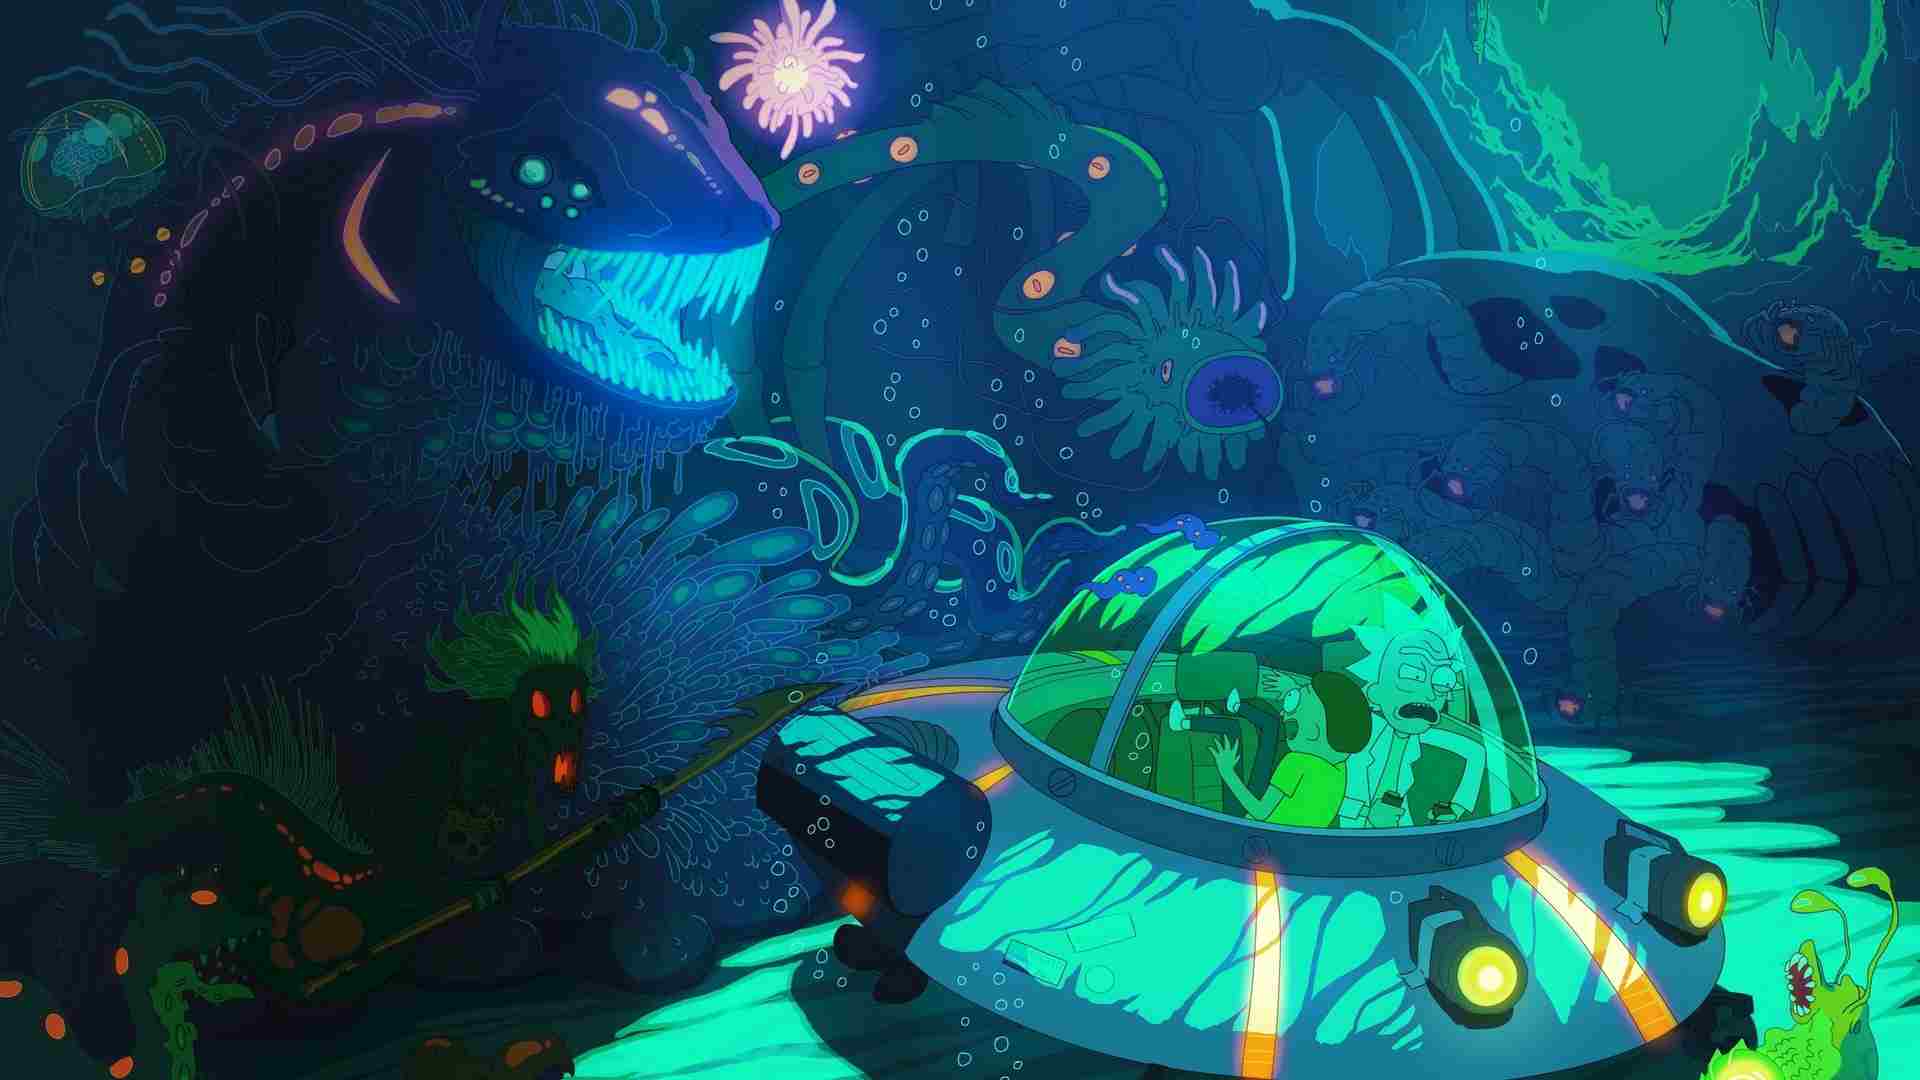 Rick And Morty Wallpapers For Pc 1080p - 1920x1080 Wallpaper 